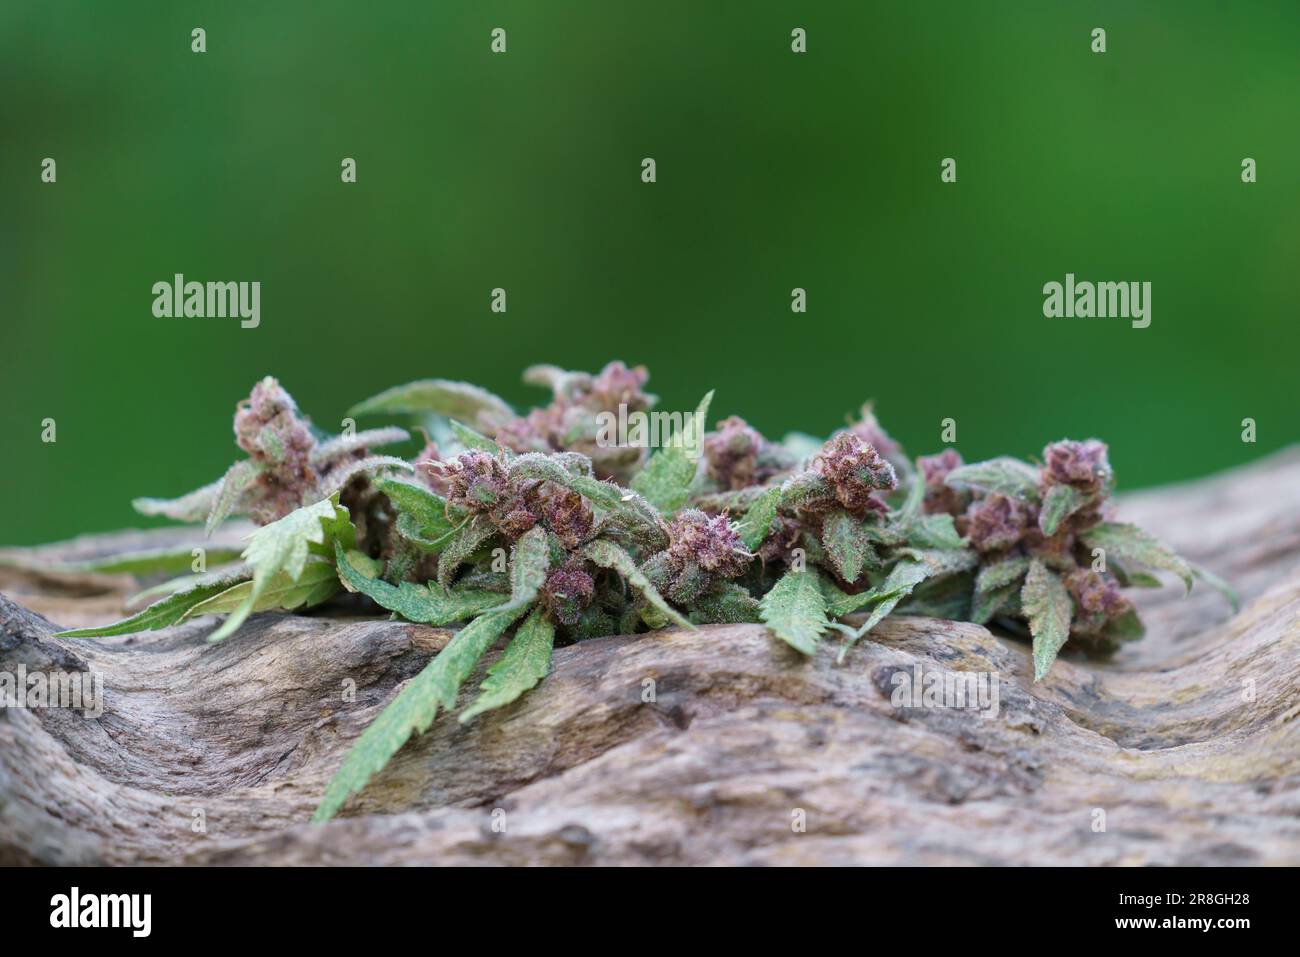 Close up of flowering cannabis plant on wood Stock Photo